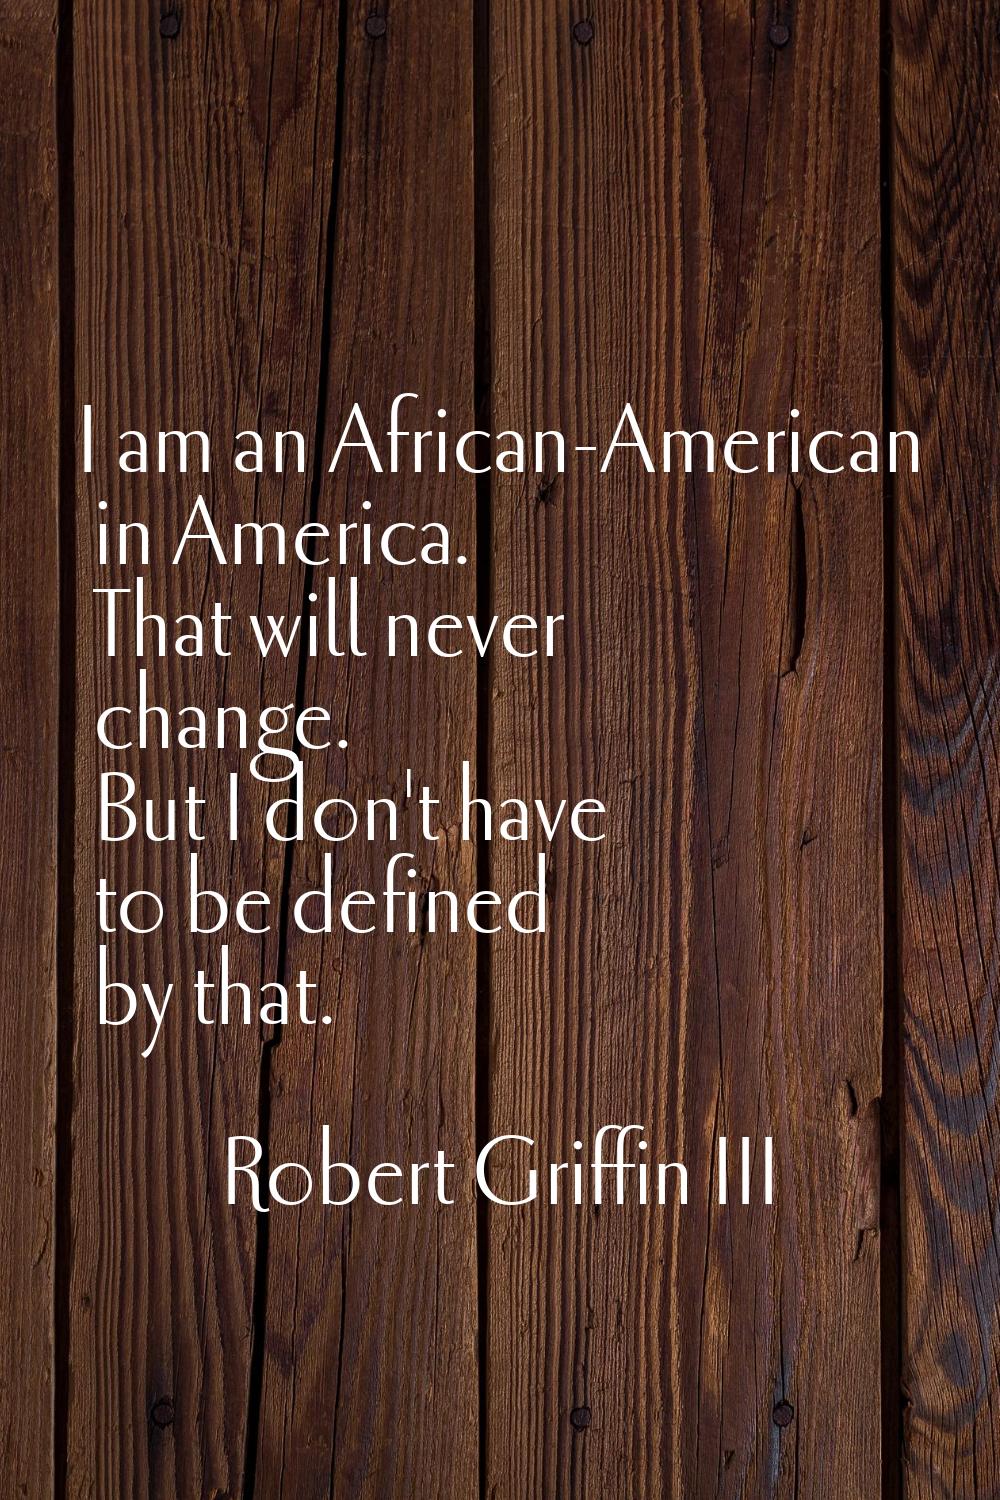 I am an African-American in America. That will never change. But I don't have to be defined by that